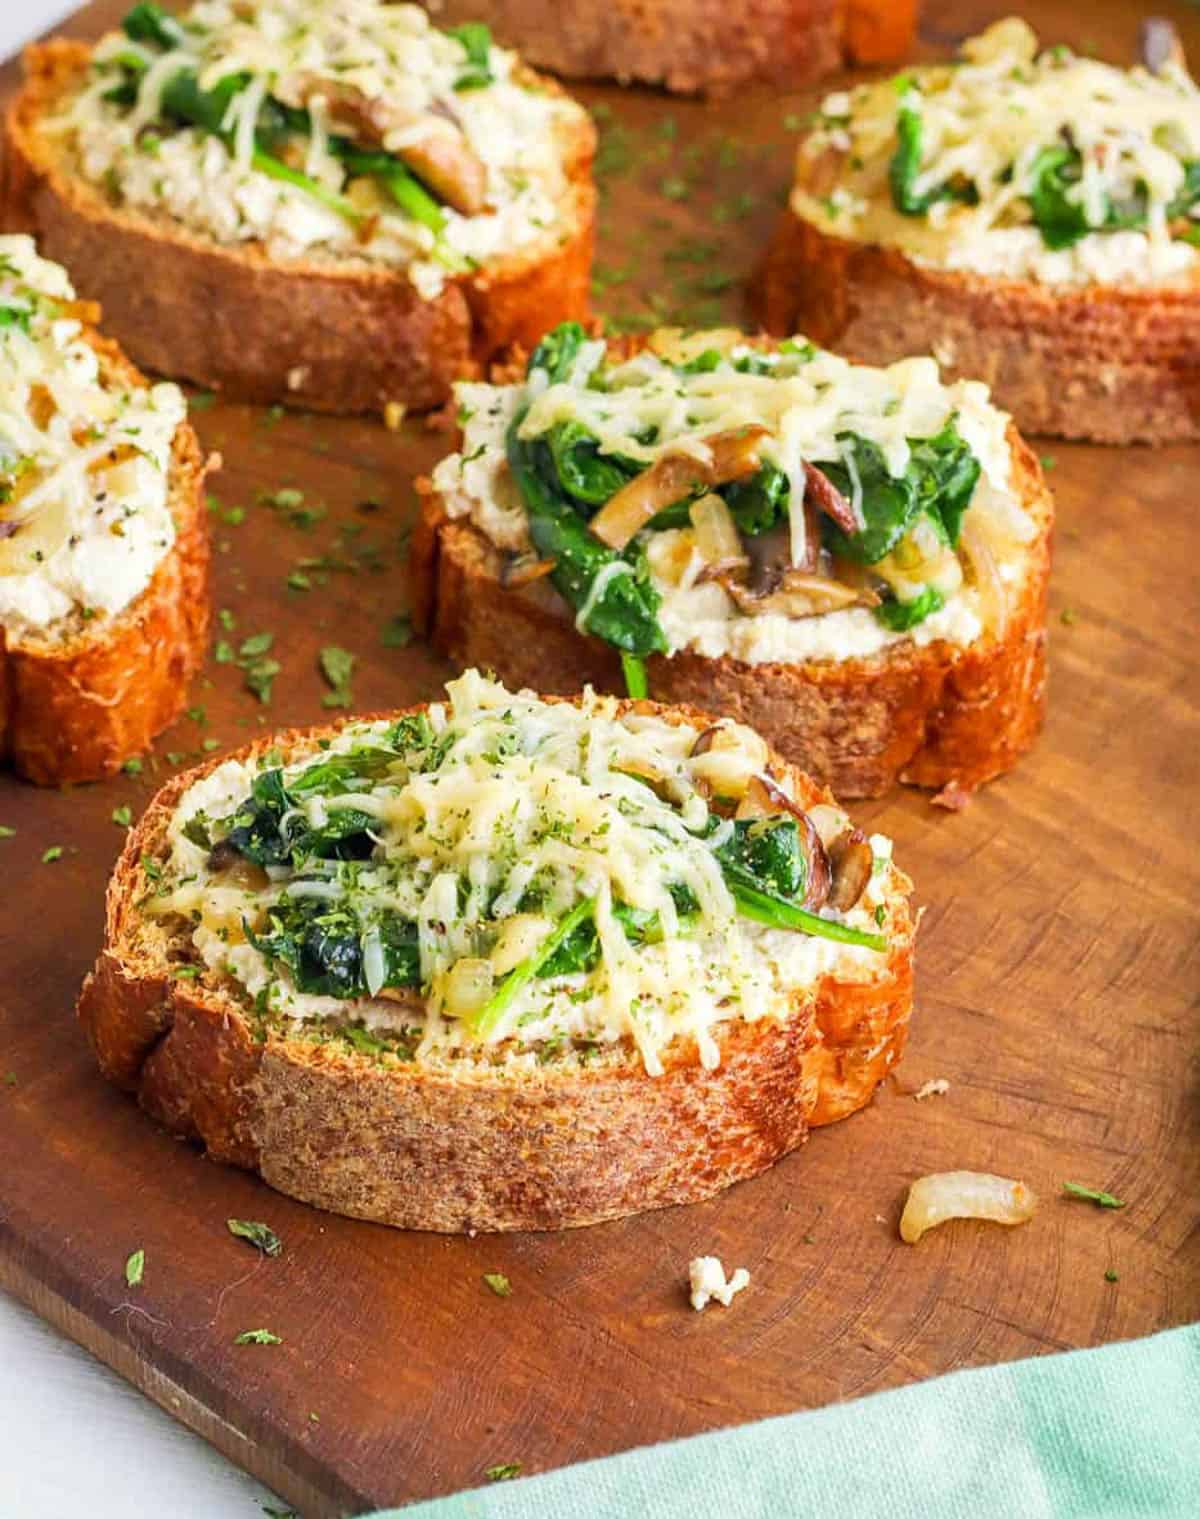 Mushroom toast topped with spinach and parmesan cheese on a wooden cutting board.